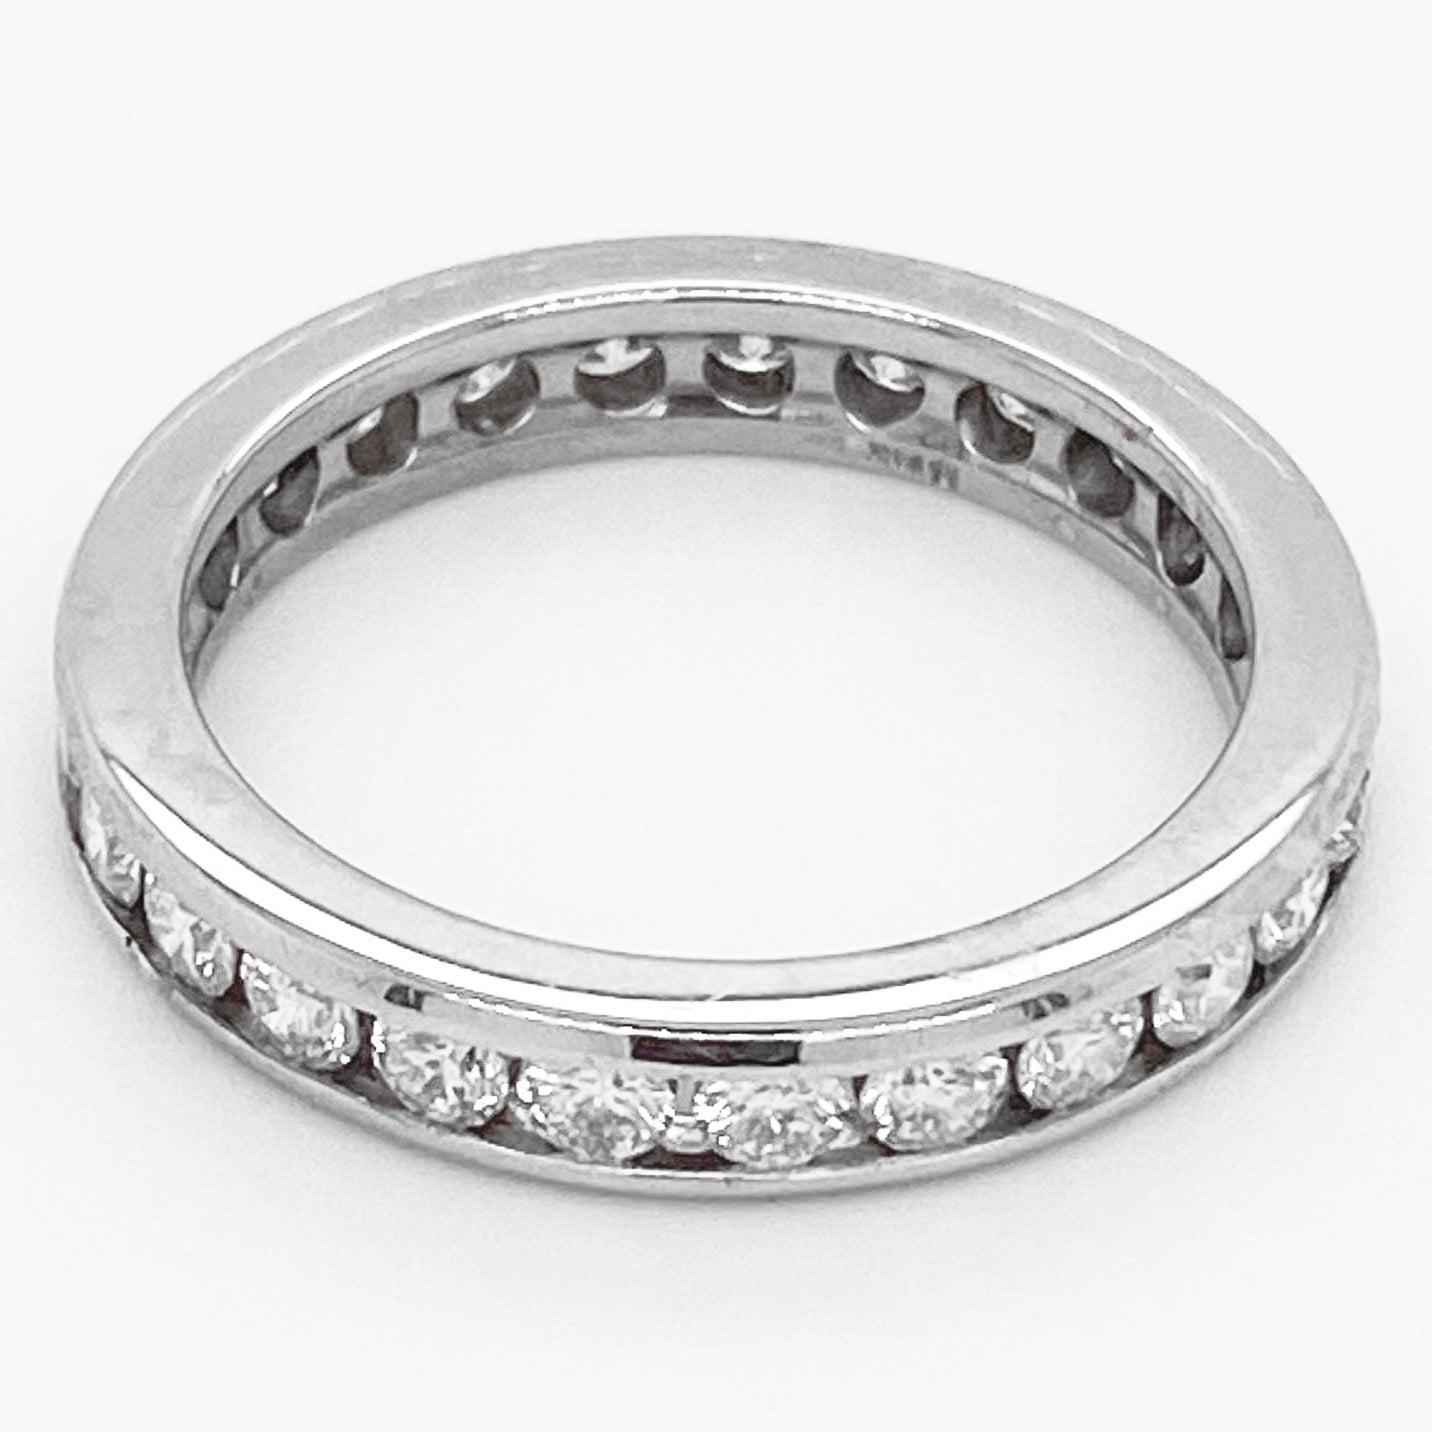 For Sale:  Channel Eternity Band Ring, White Gold, 1.50 Carat Diamond, Infinity 4